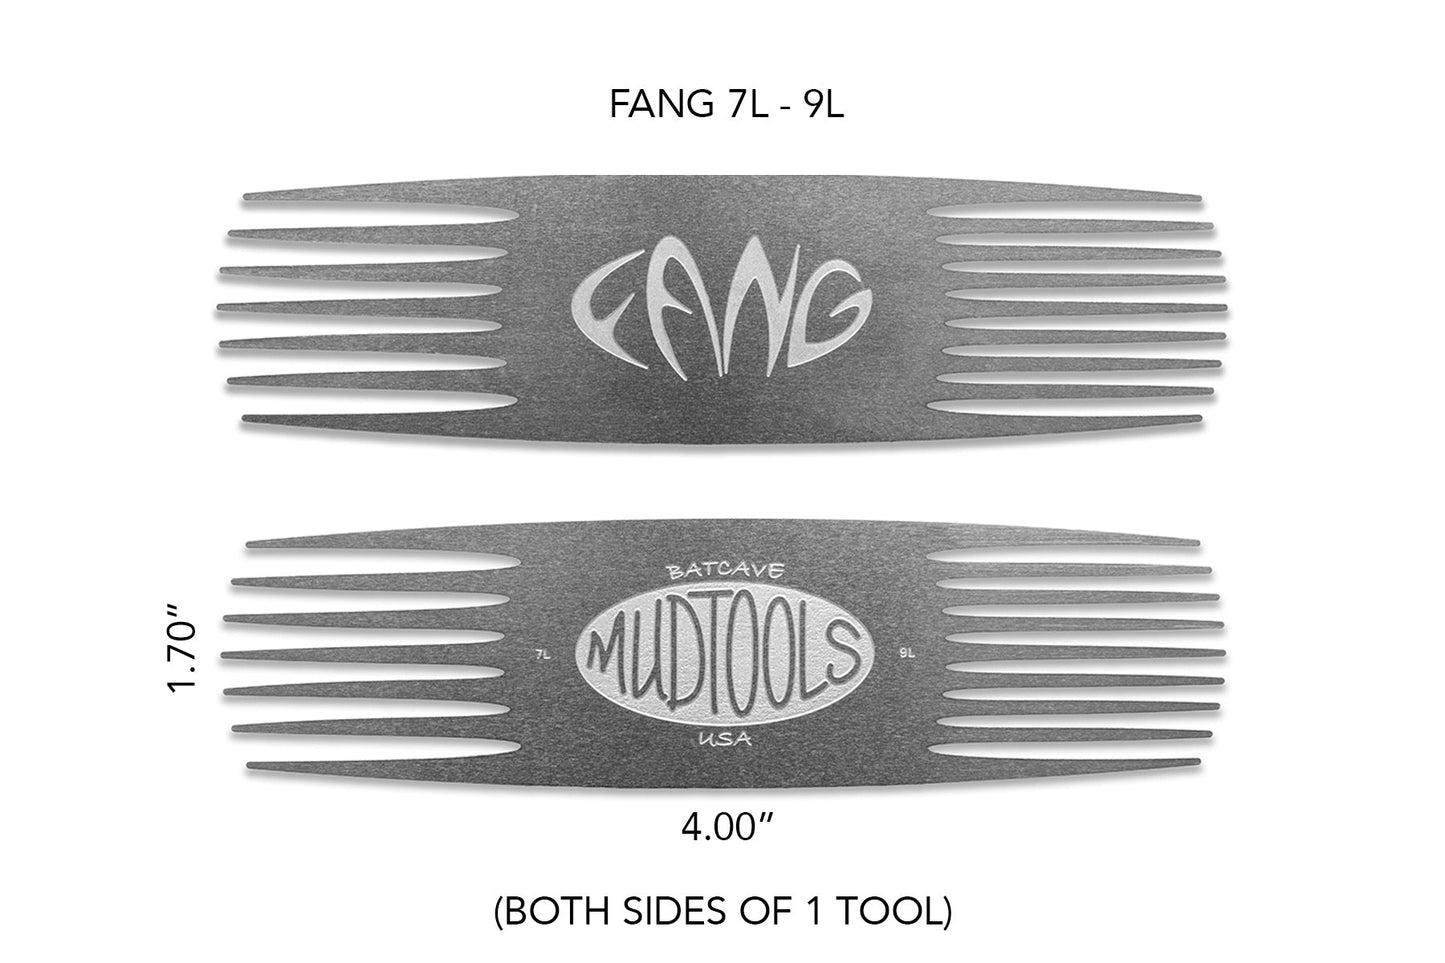 FANG Large Stainless Steel Scoring Tools